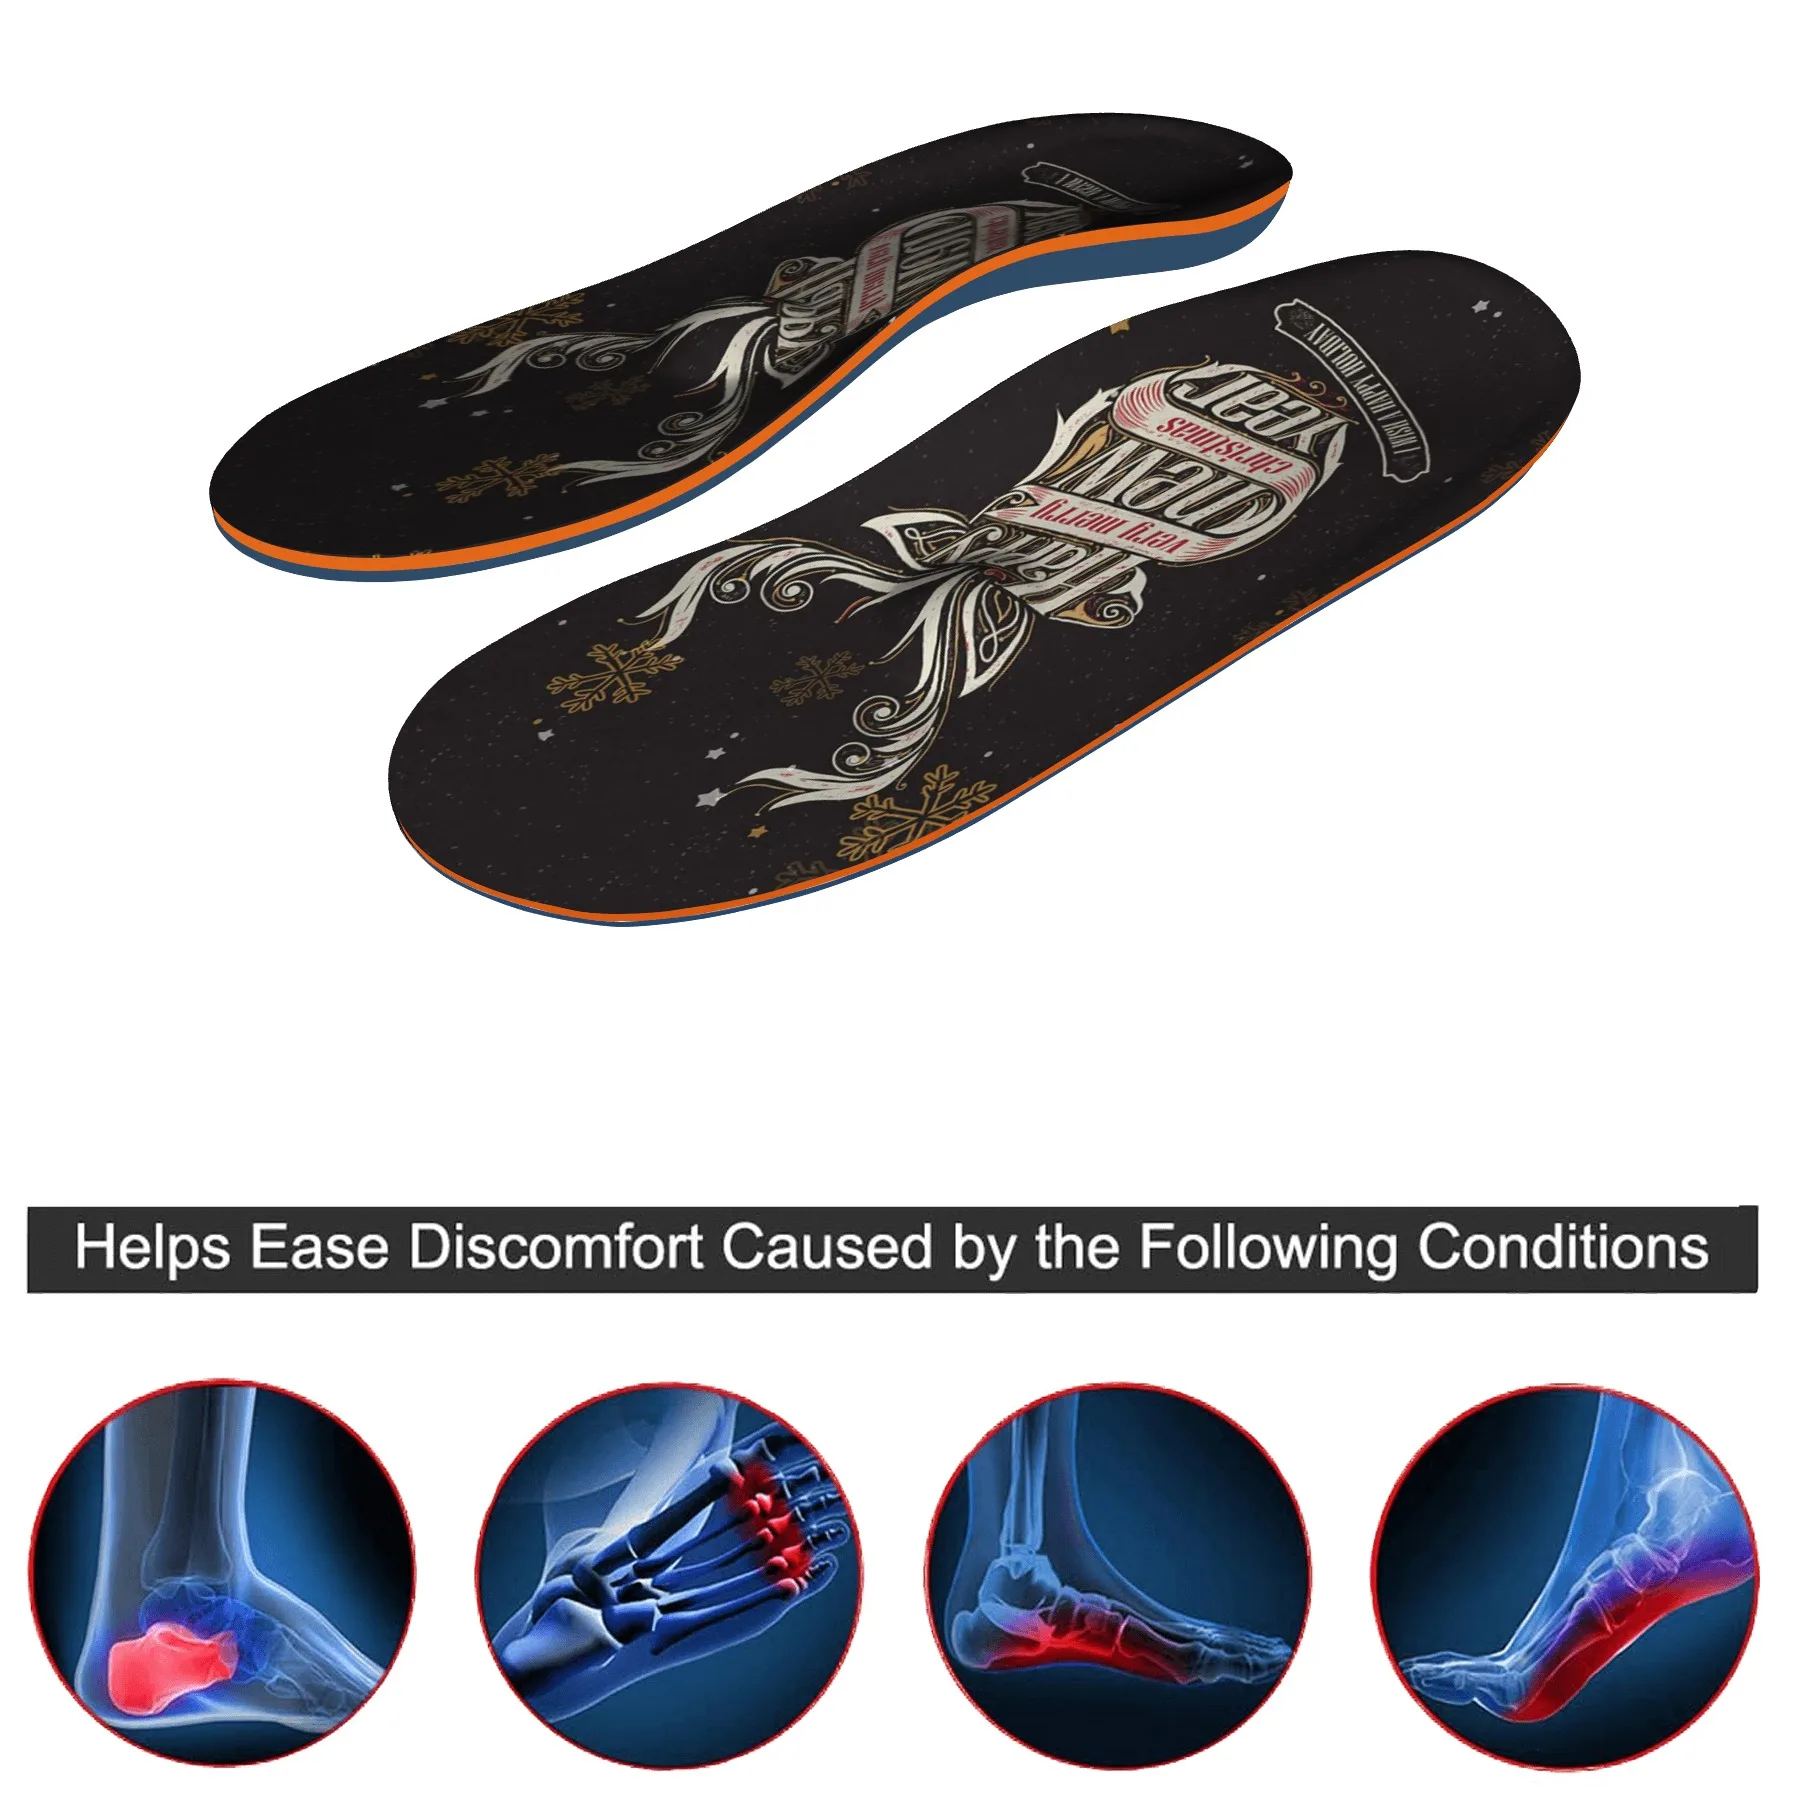 Christmas men's and women's orthopedic insoles flat feet comfortable non-slip orthopedic plantar fasciitis arch support